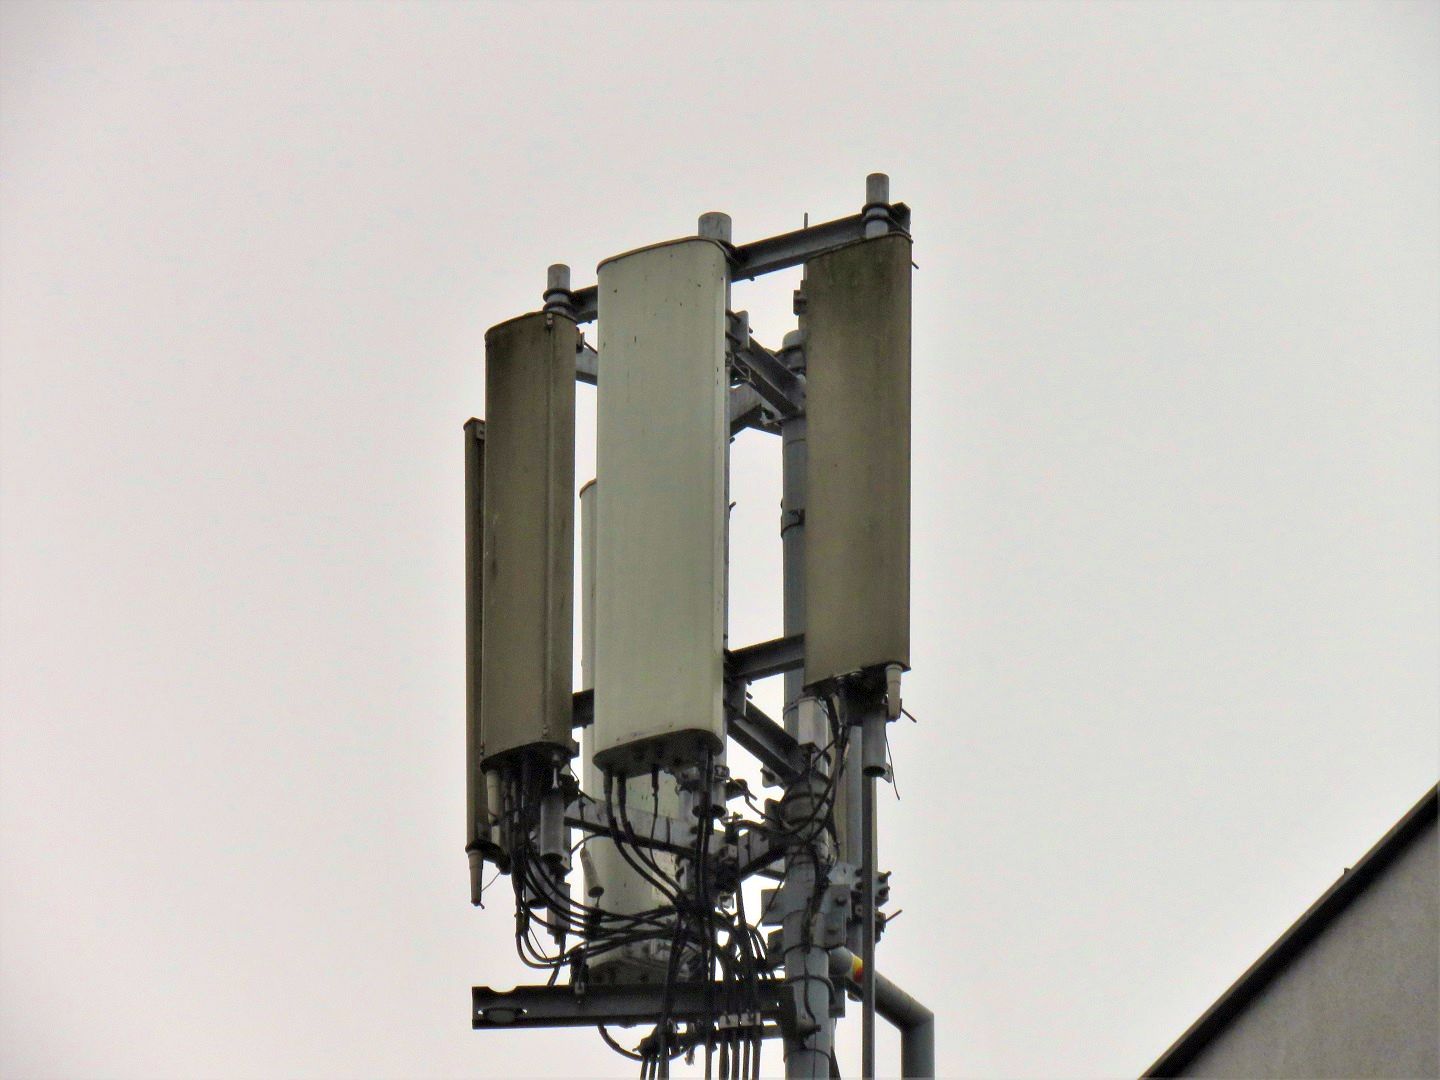 Huawei and Kathrein Antennas used by Orange and T-Mobile